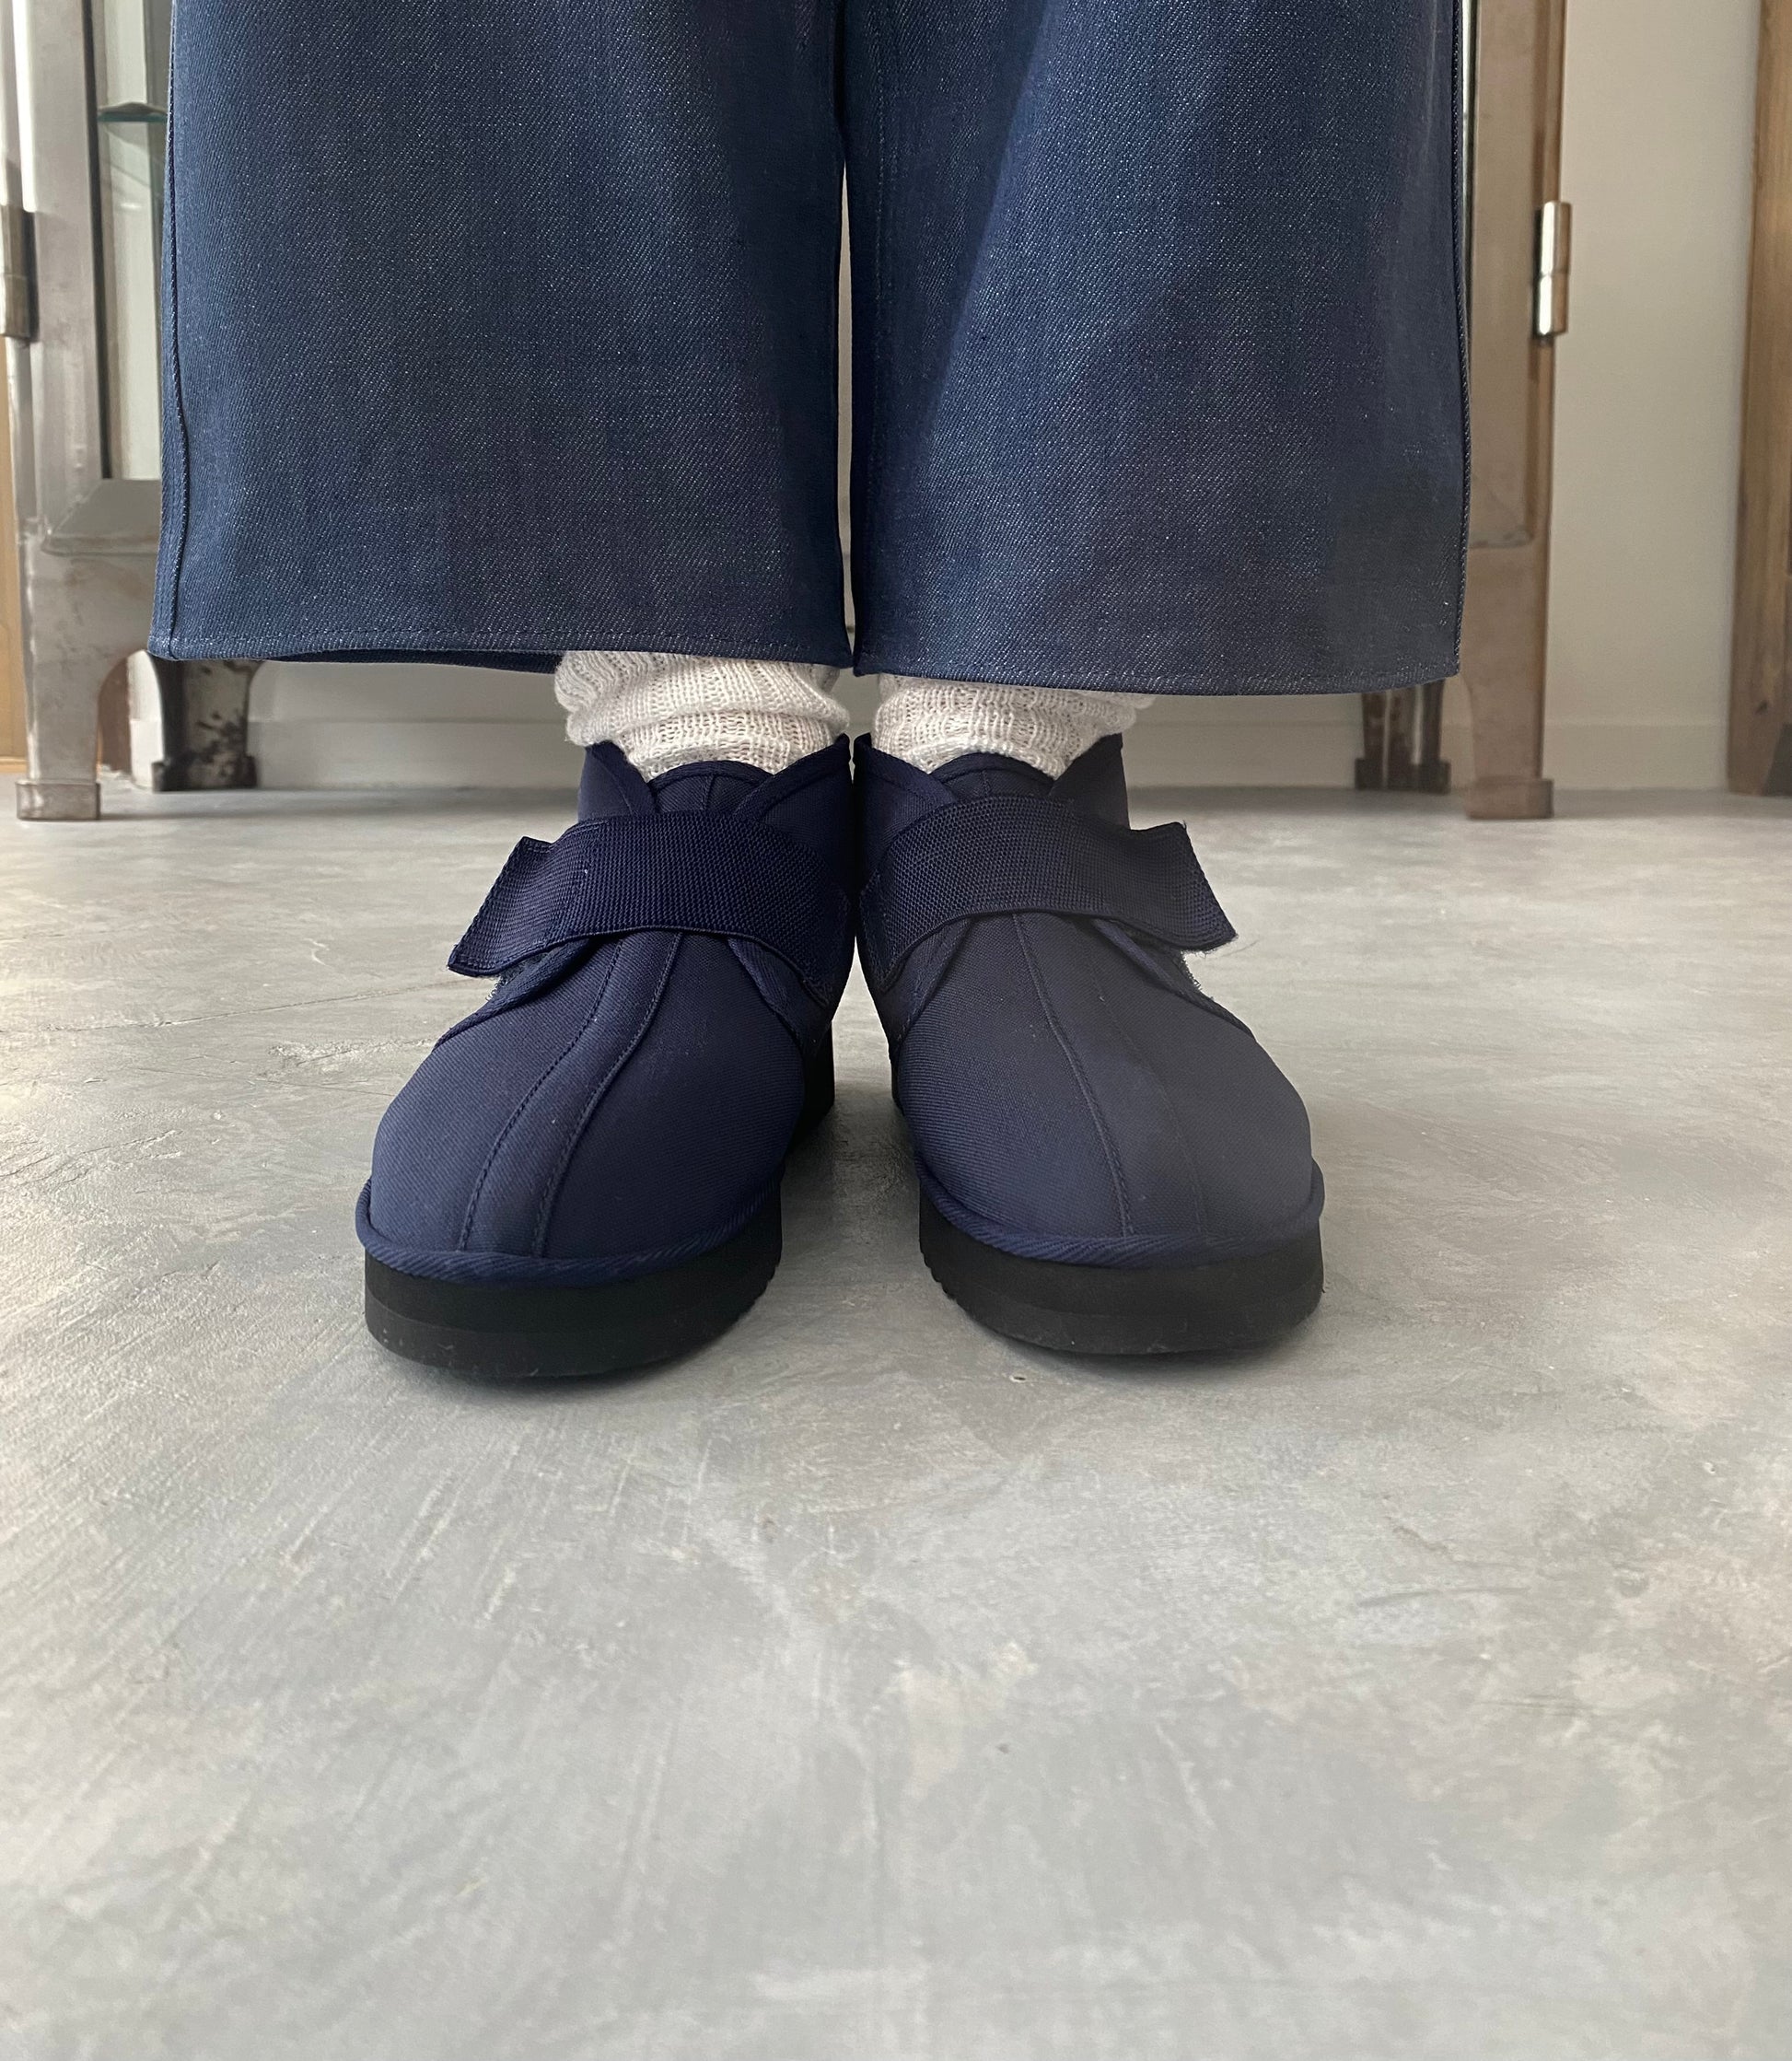 BELT SHOES　Marbot マルボー　靴　通販